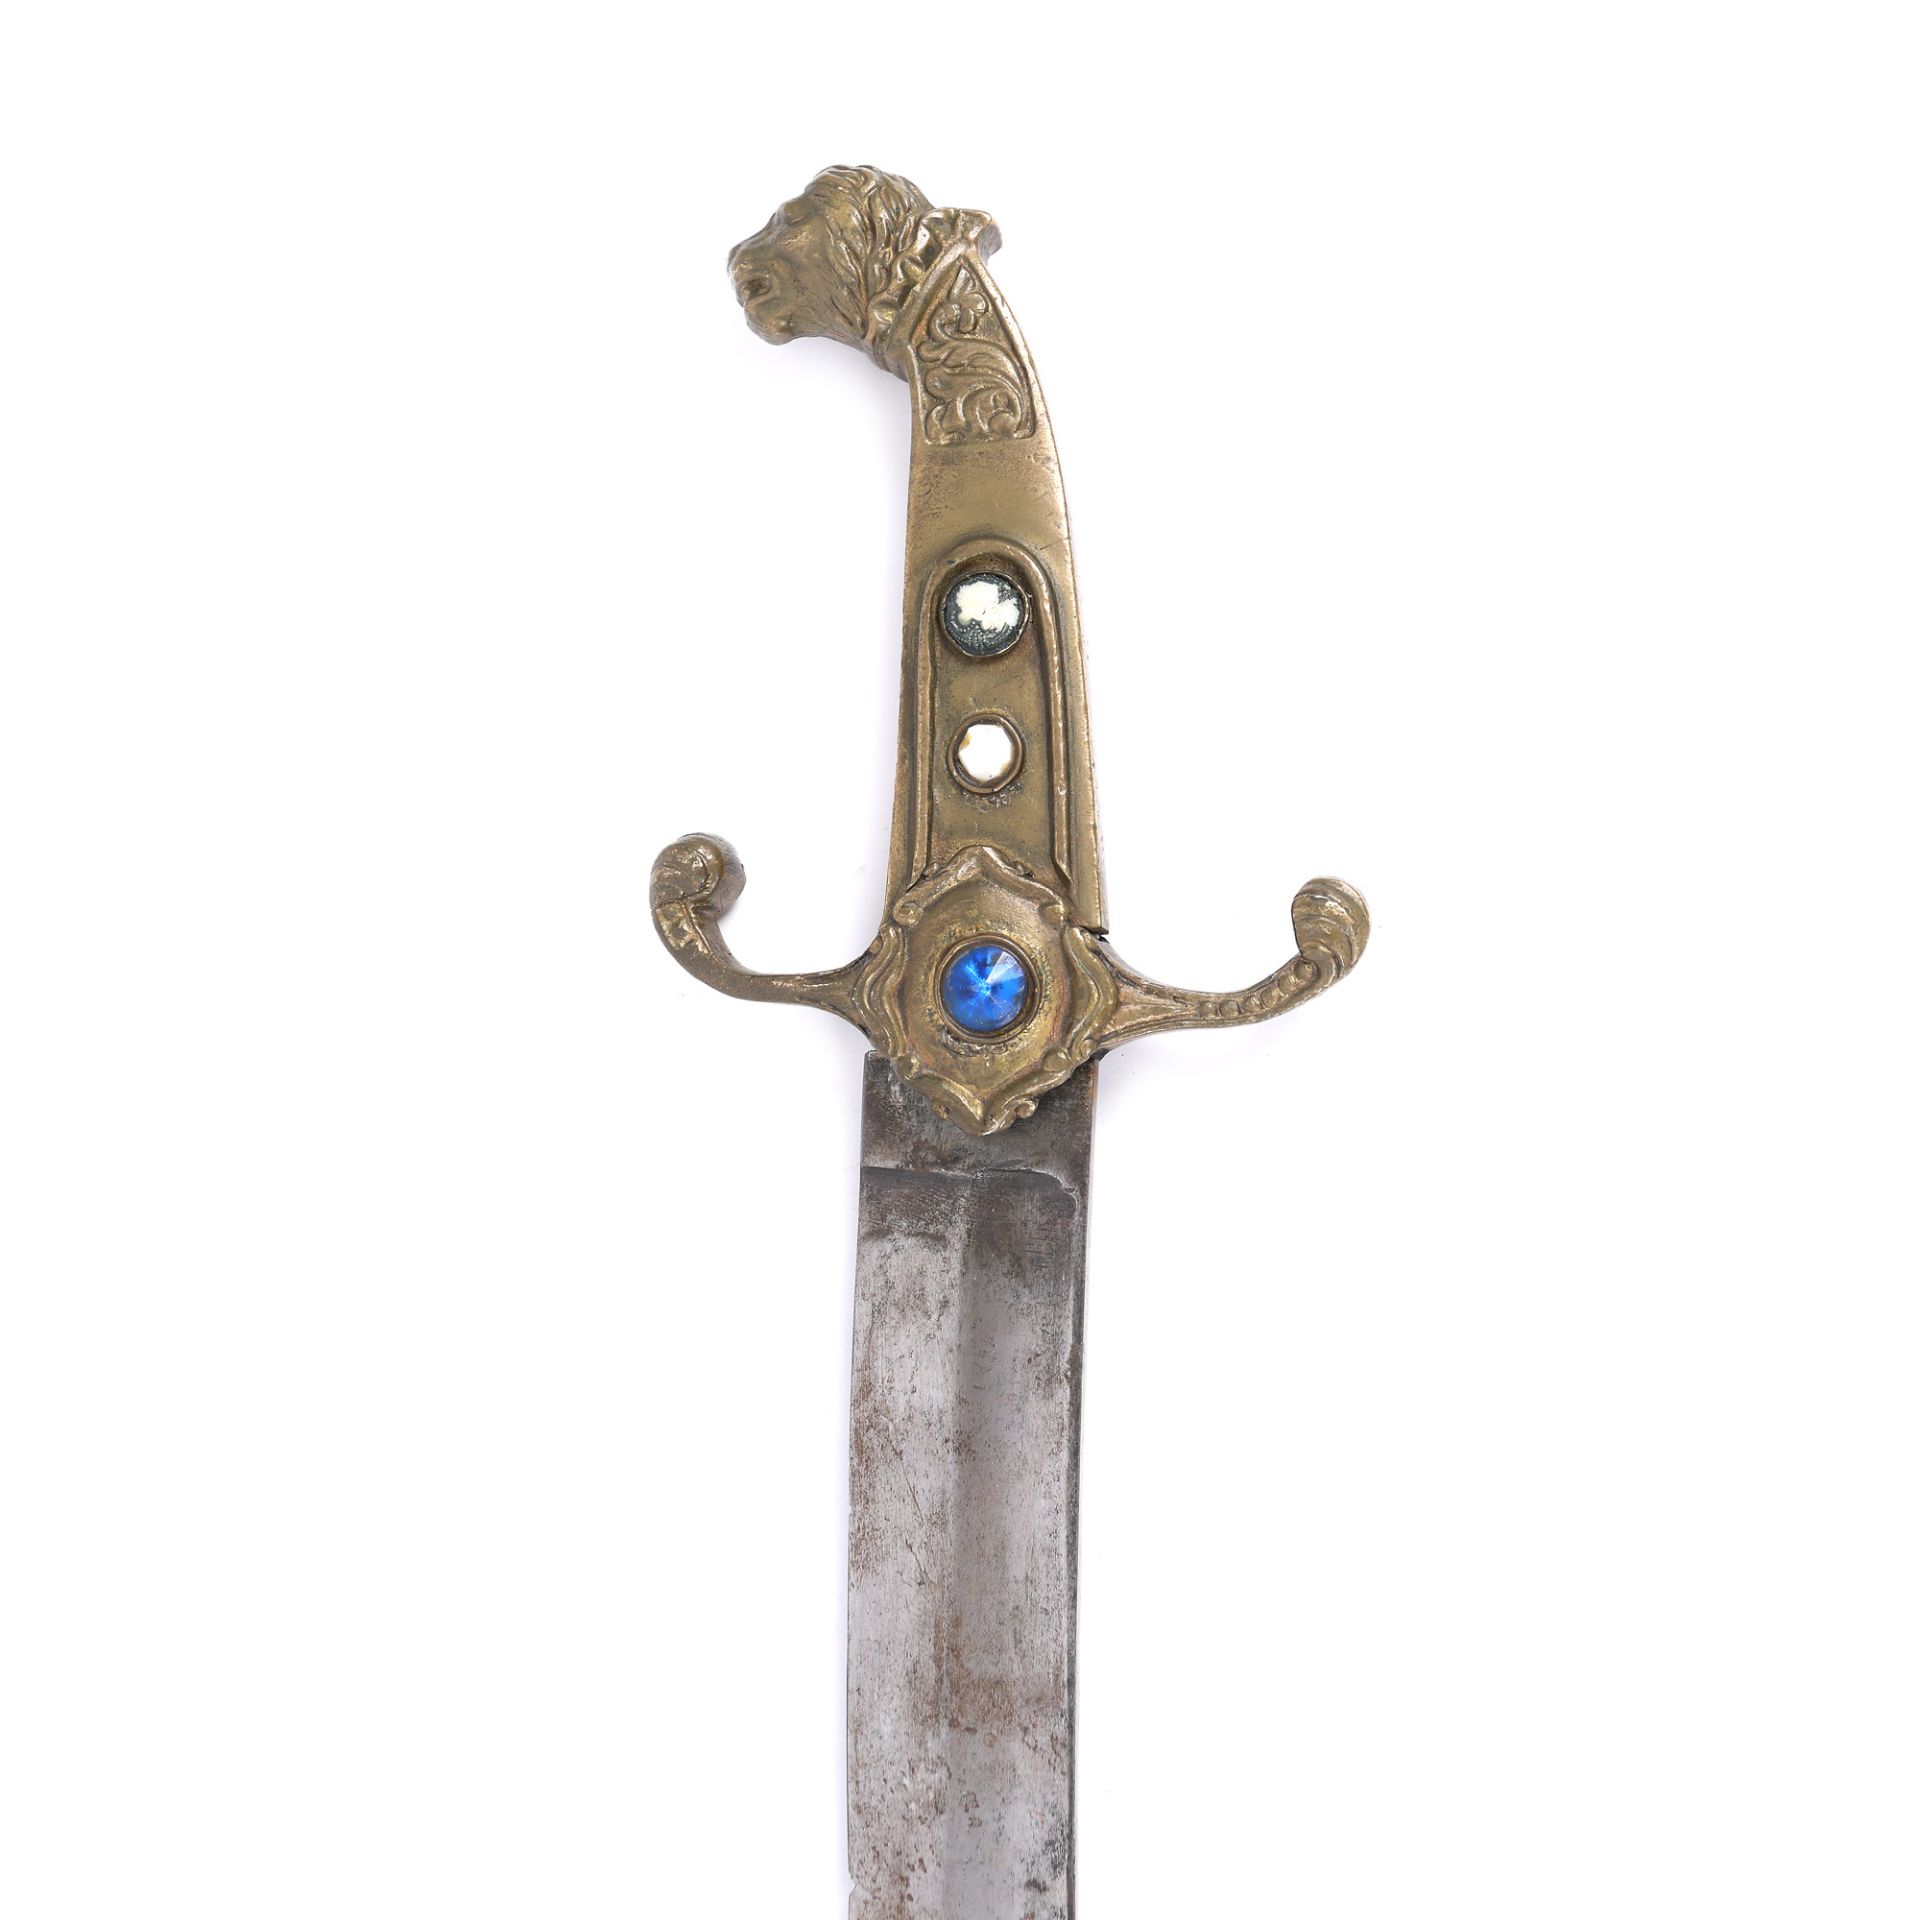 Shamshir Islamic sword, decorated with a lion’s head, end of the 19th century - Image 2 of 3